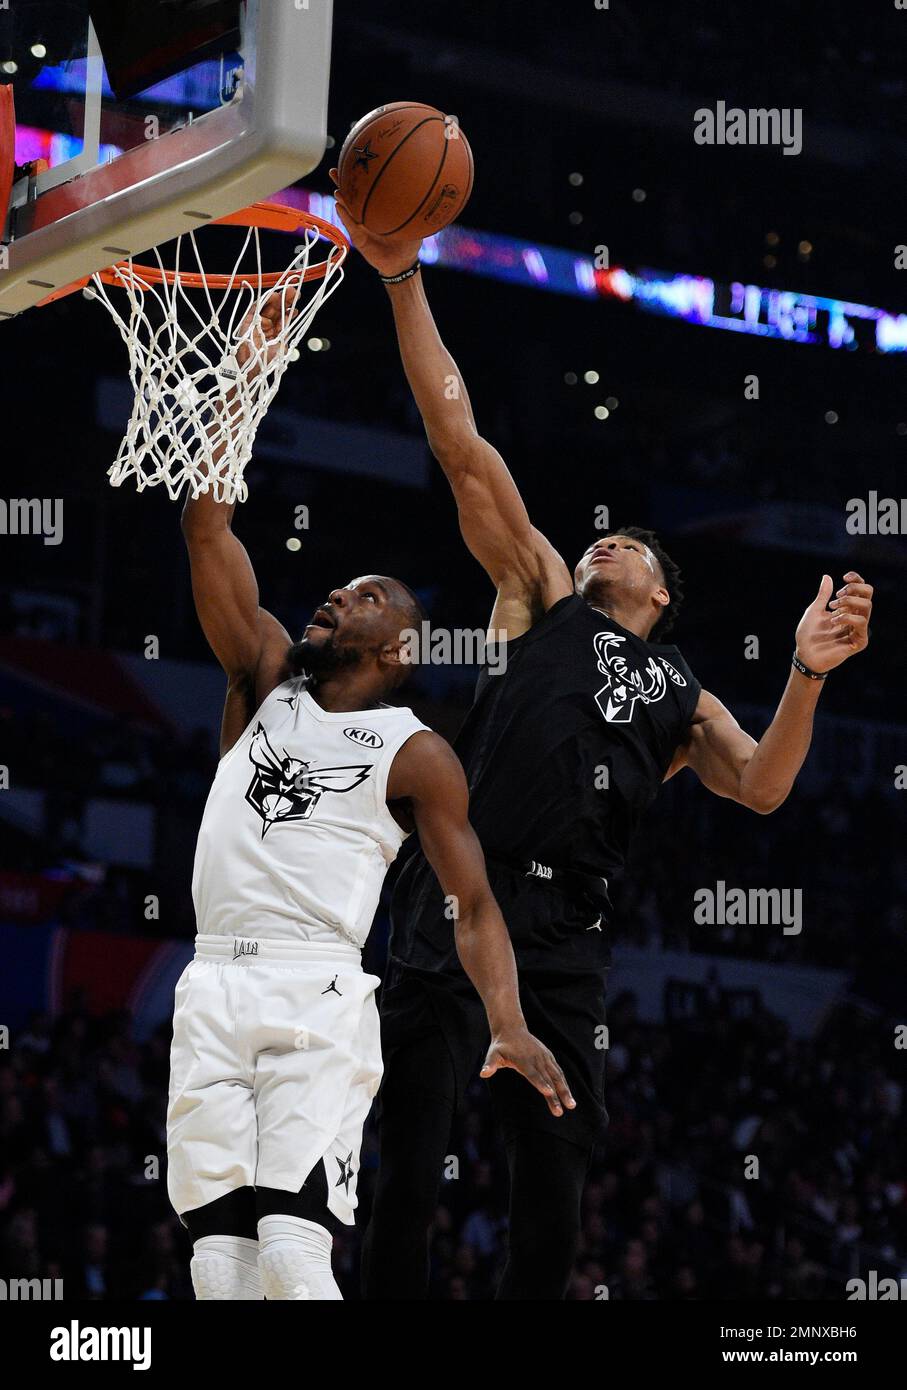 Giannis Antetokounmpo of Team Giannis blocks a shot attempt from LeBron  James of Team LeBron in the fourth quarter of the NBA All-Star Game on  Sunday, Feb. 16, 2020 at the United